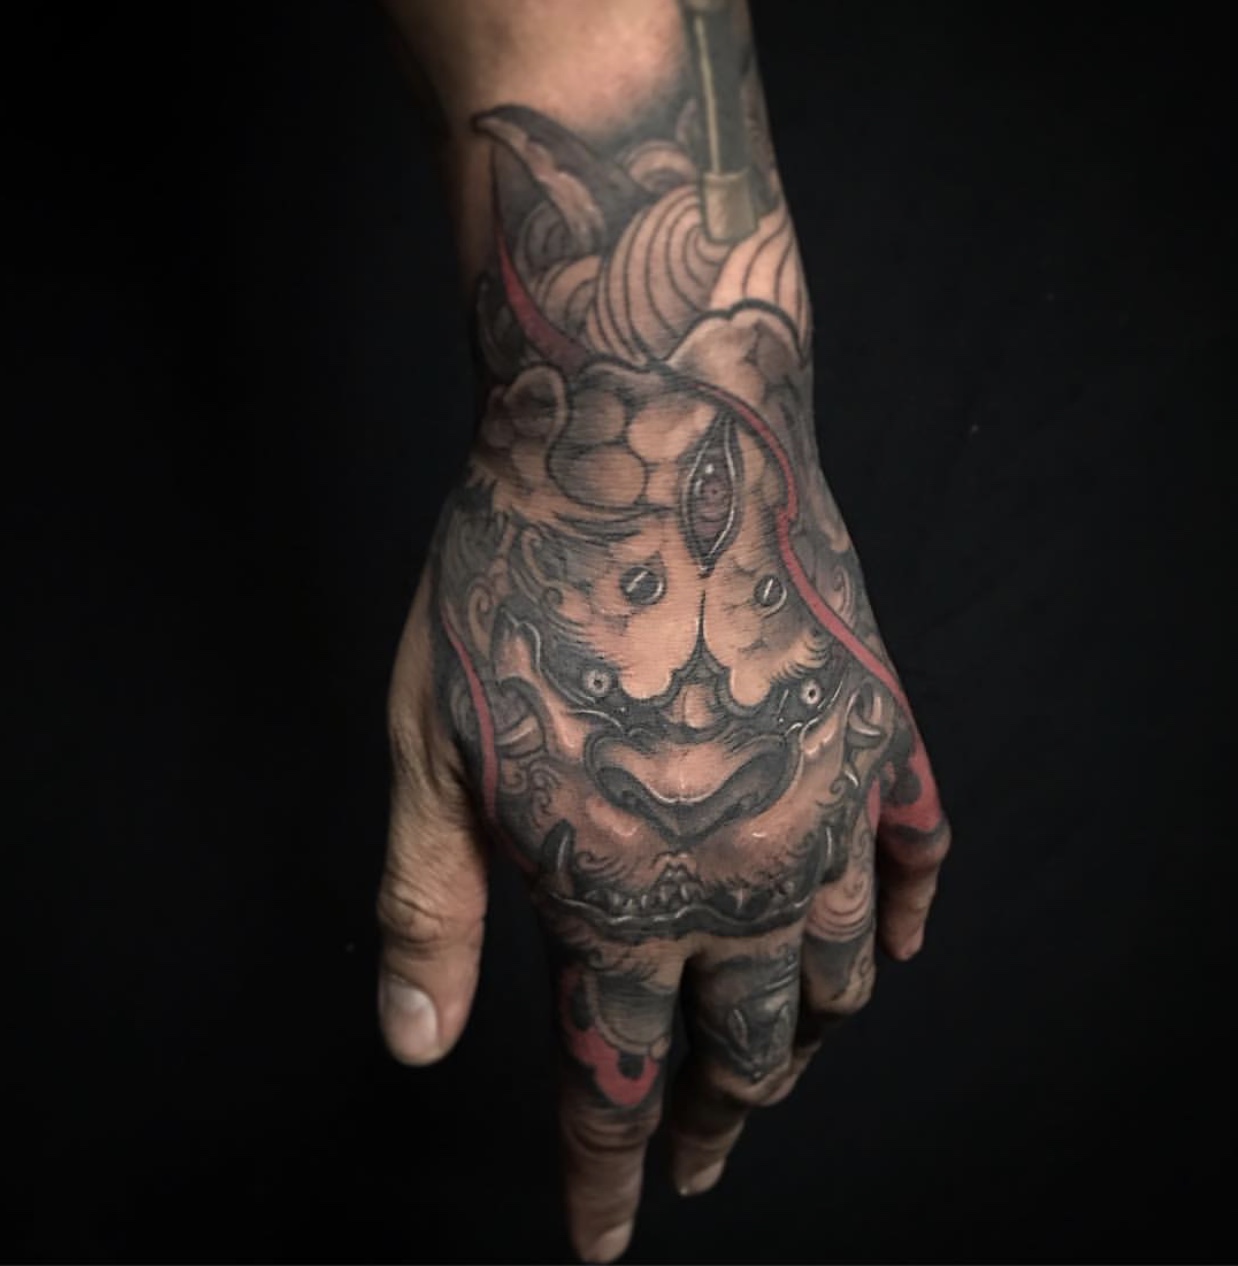 Giant Asian Dragons Tattoo On Hand  Tattoo Ink Master